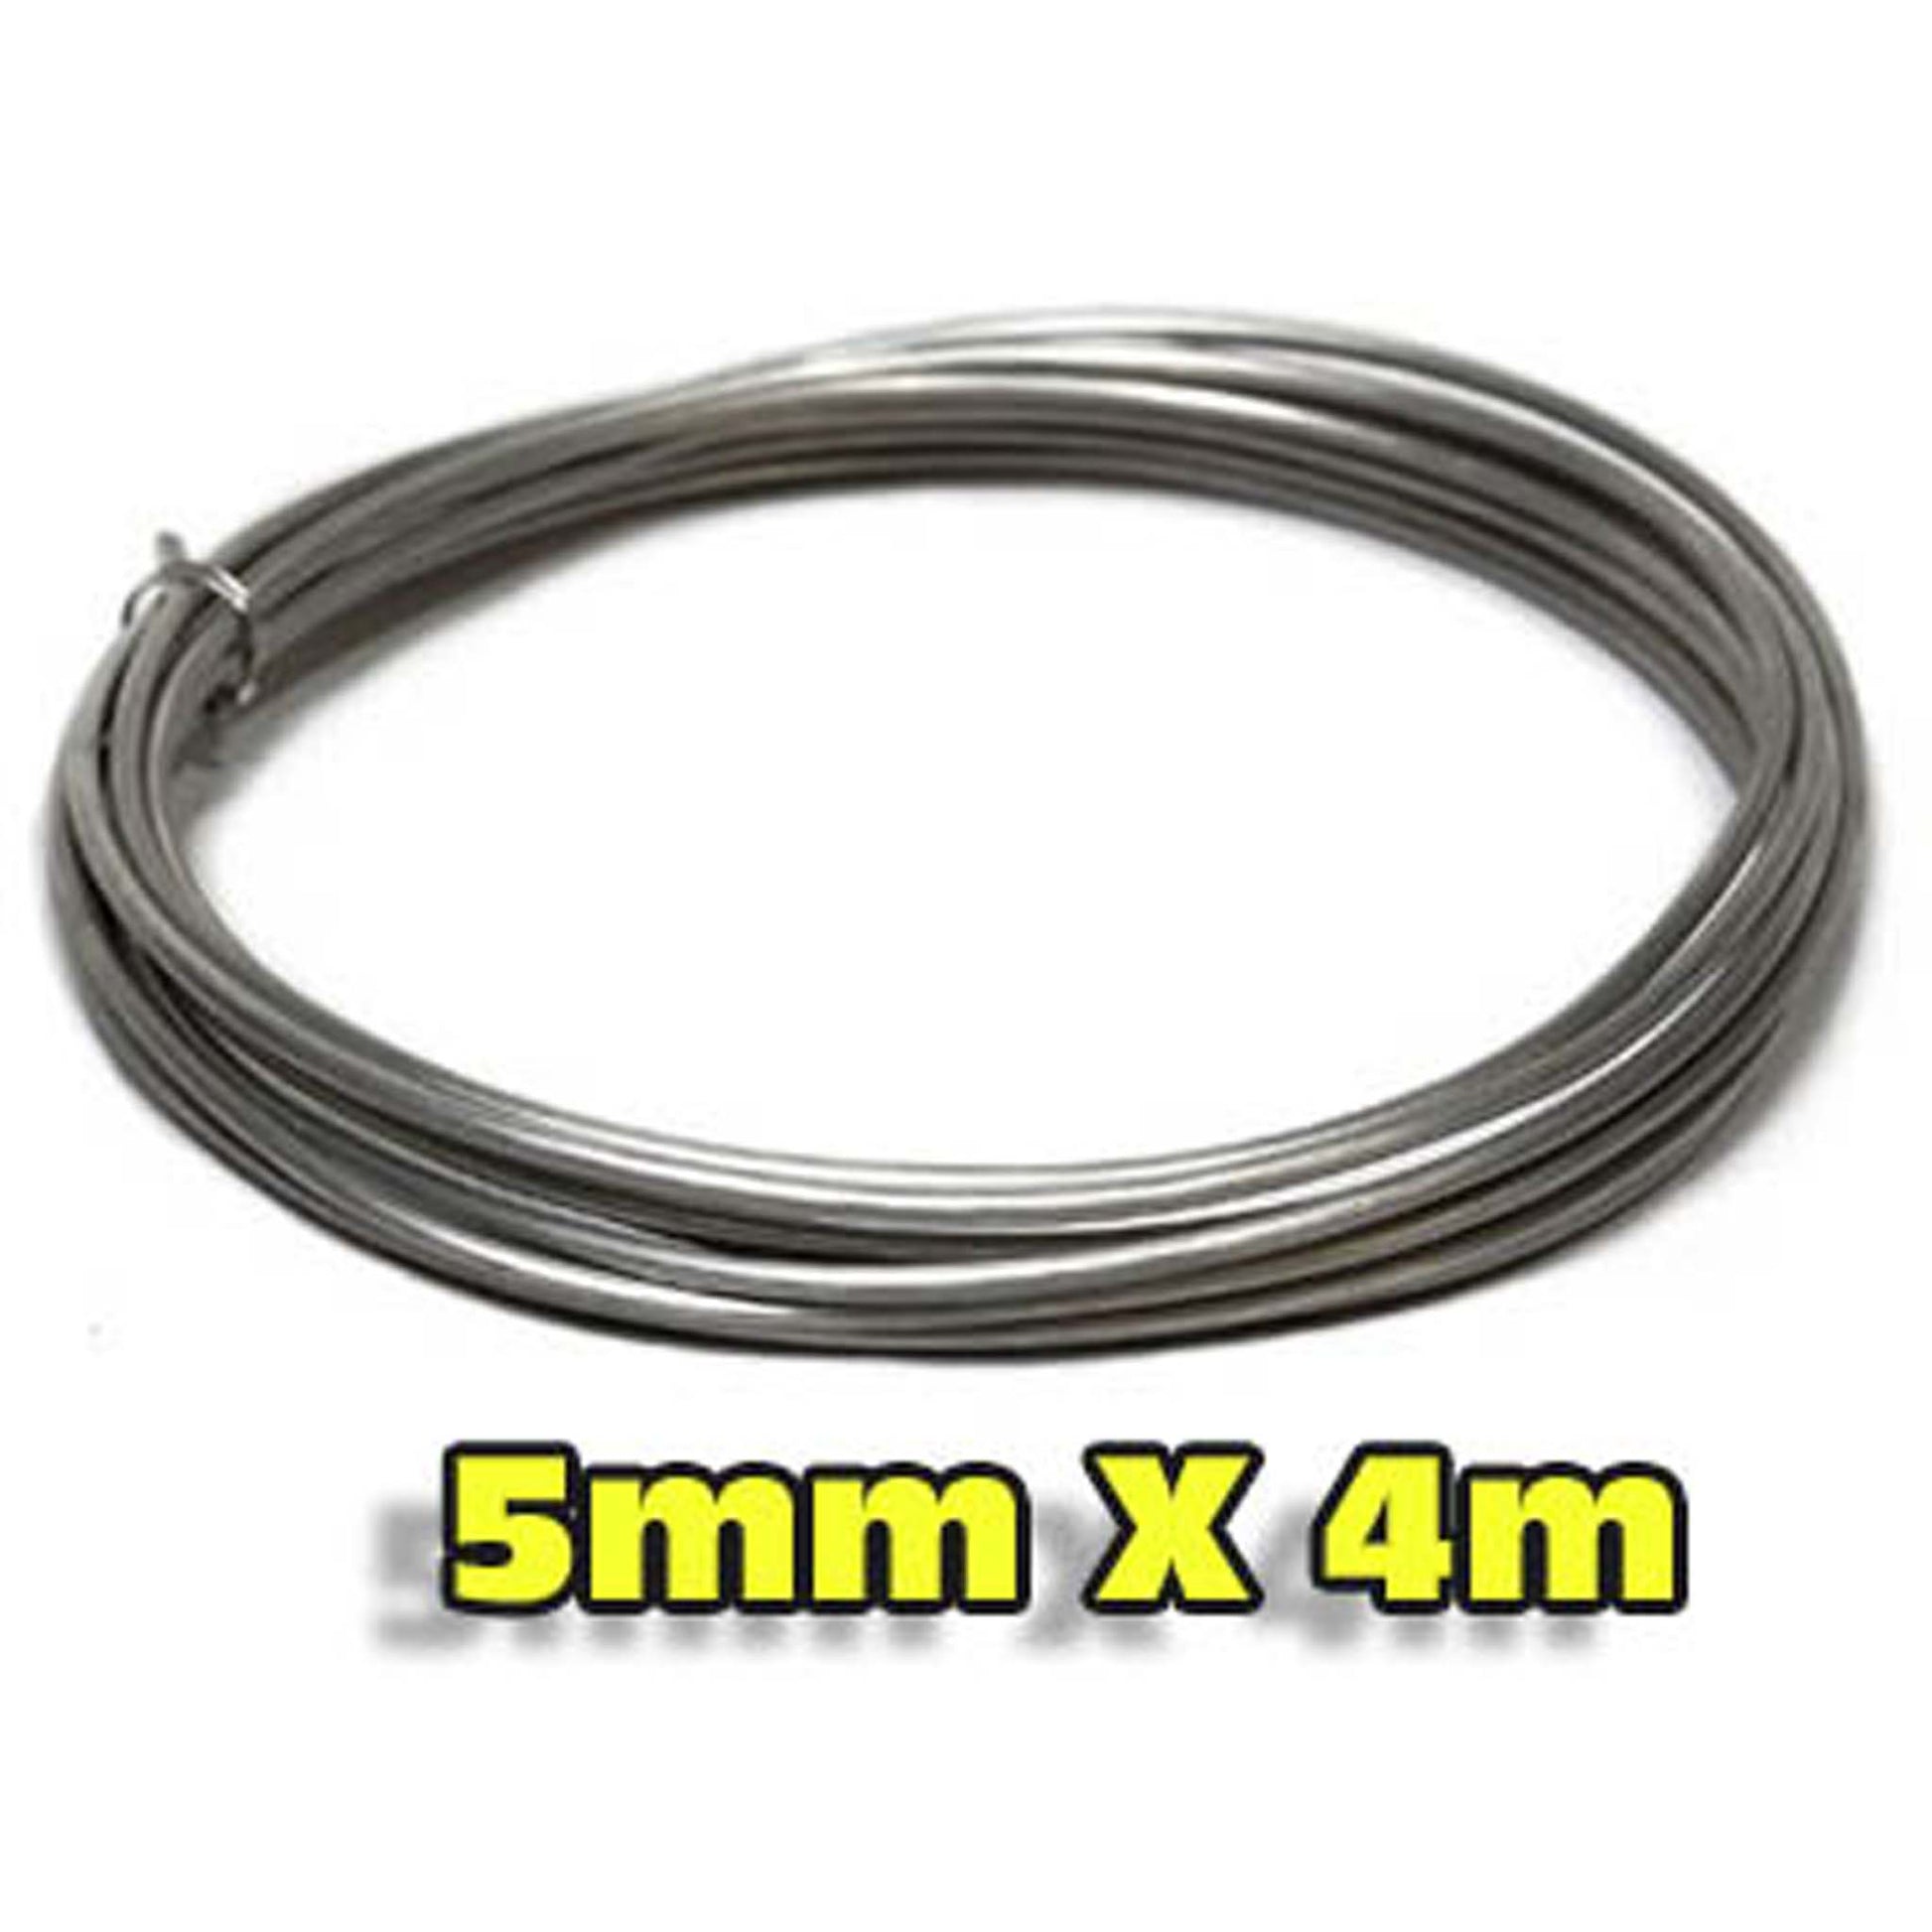 A 5mm by 4m spool of annealed aluminum craft wire for stop motion armatures.